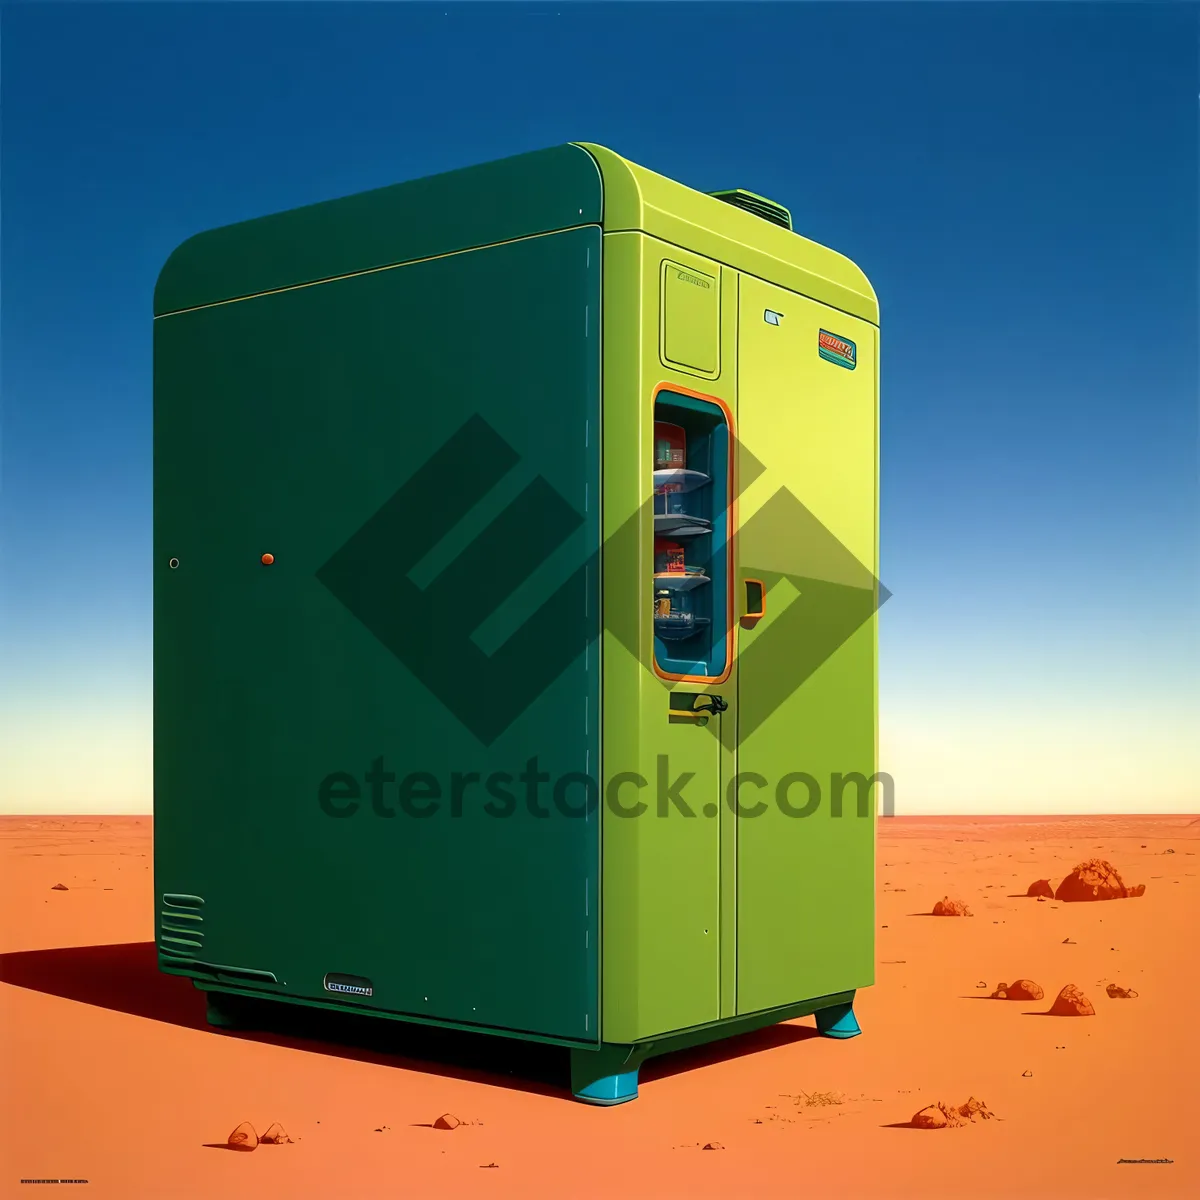 Picture of Secure Data Storage Box for Business Equipment